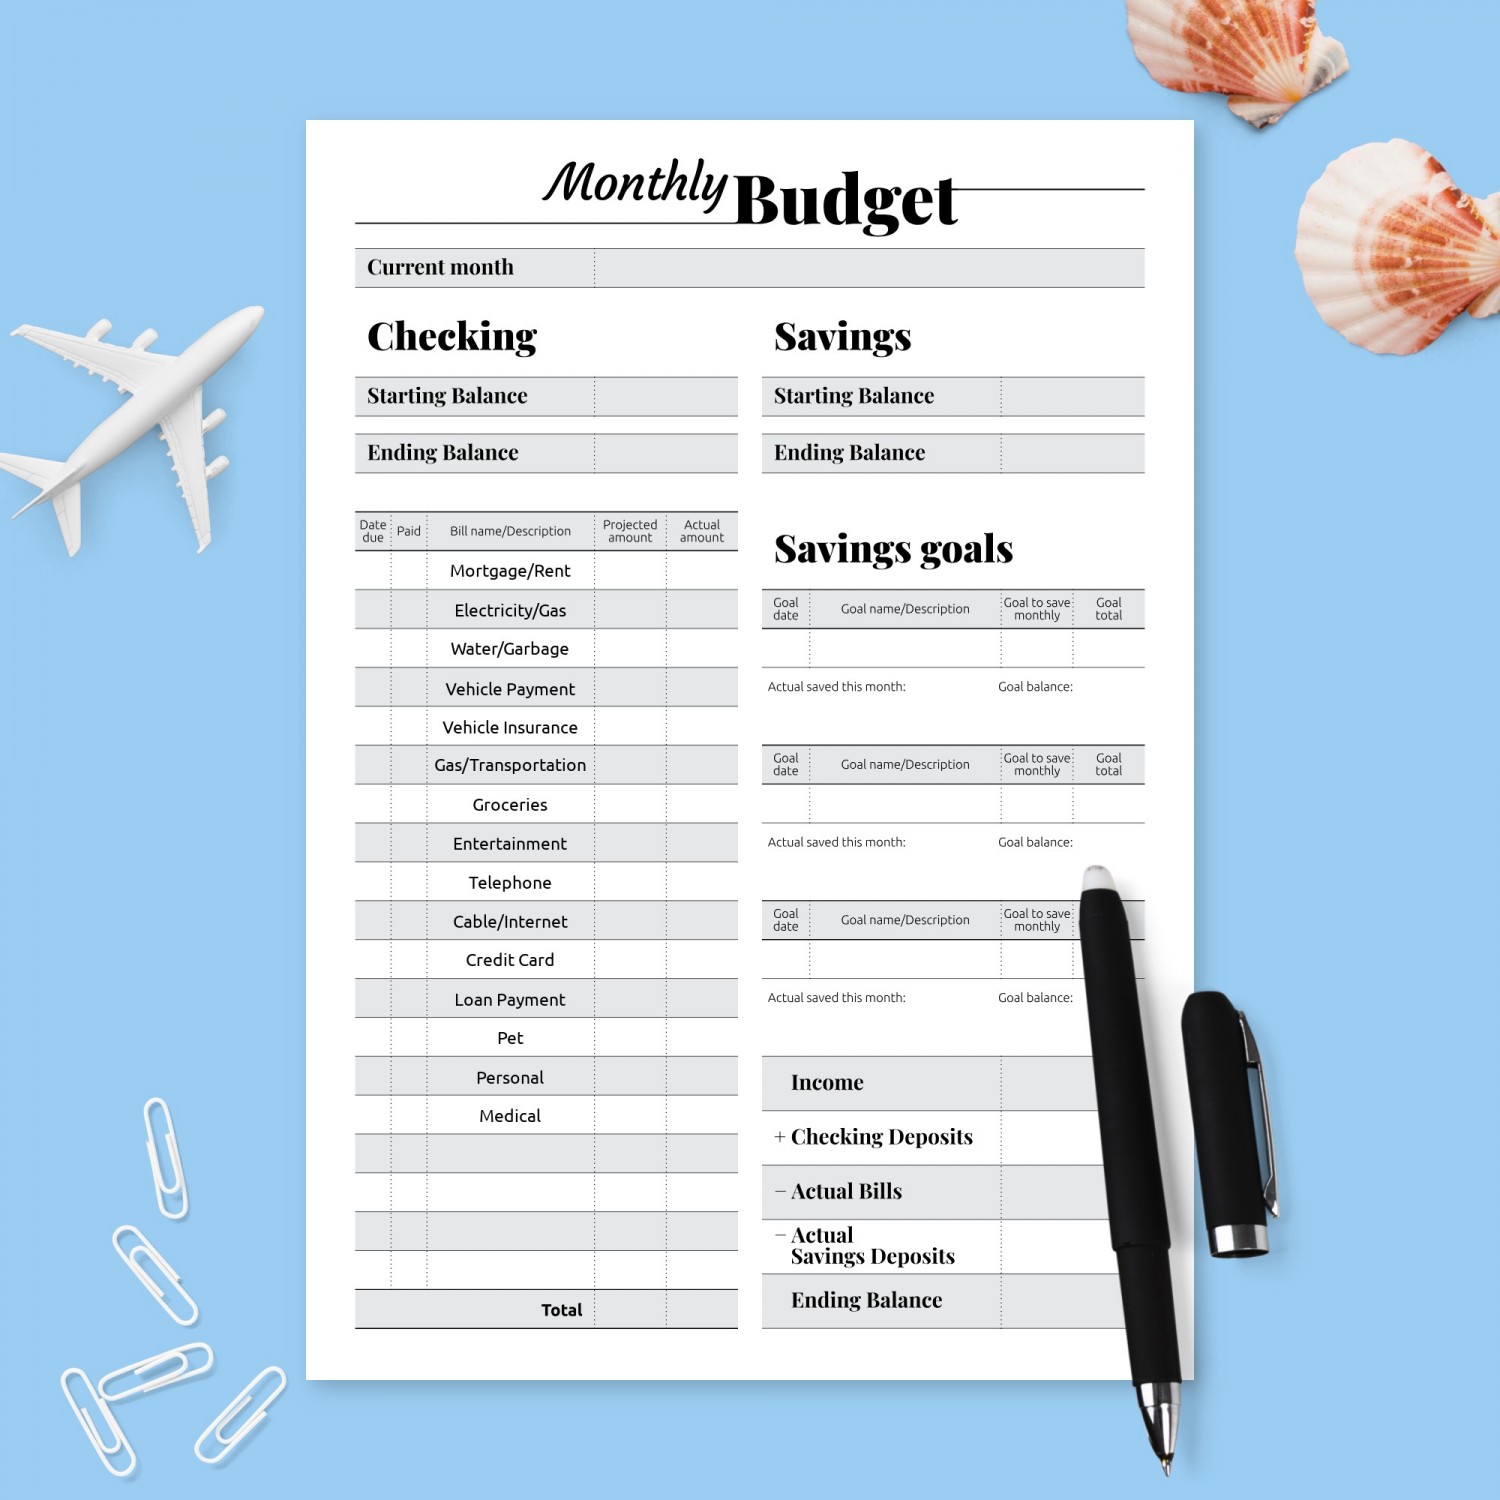 personal budget plan template